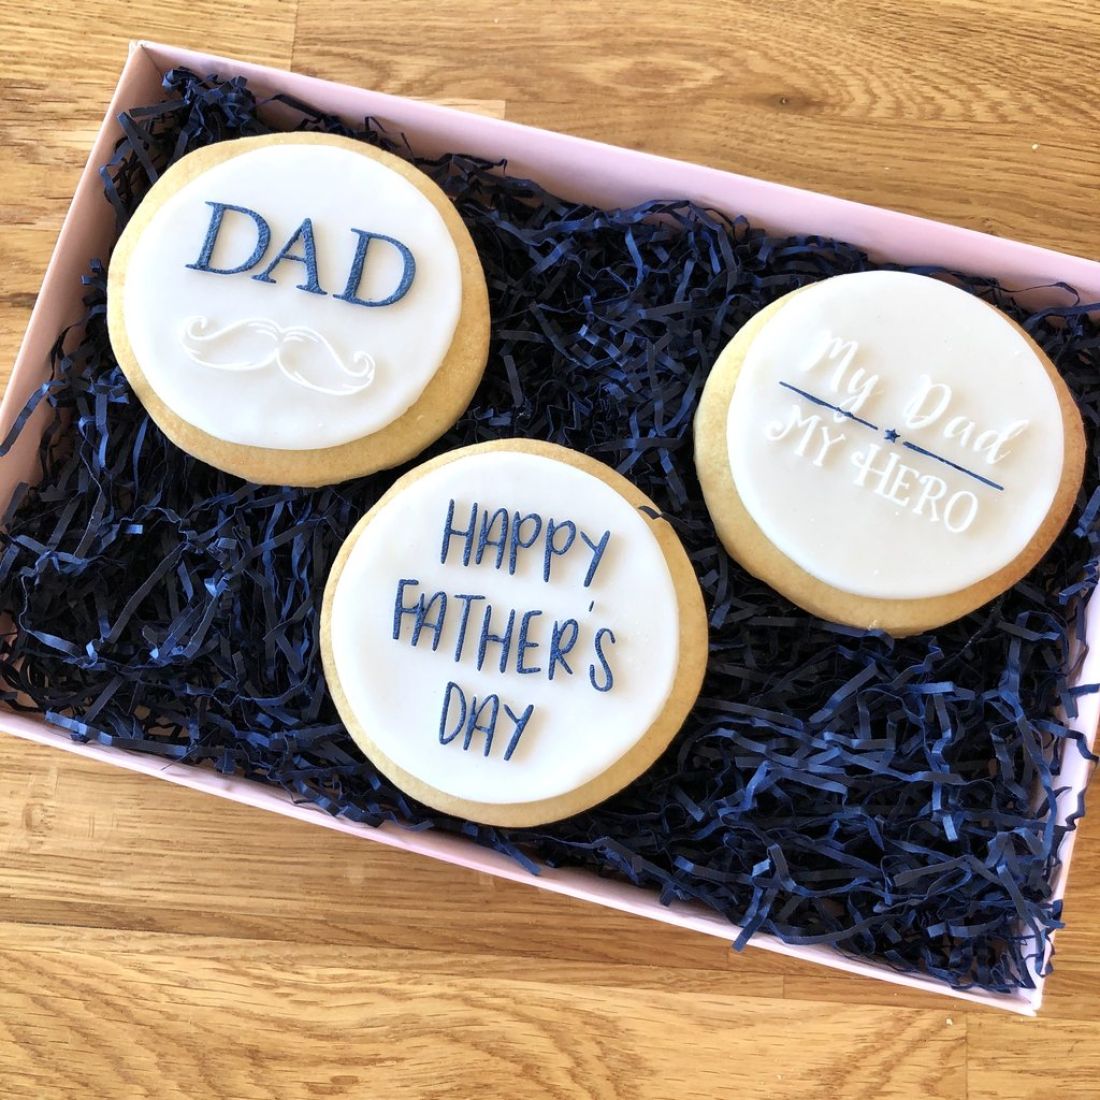 Happy Father's Day beer embosser stamp cookie  fondant cupcake decoration